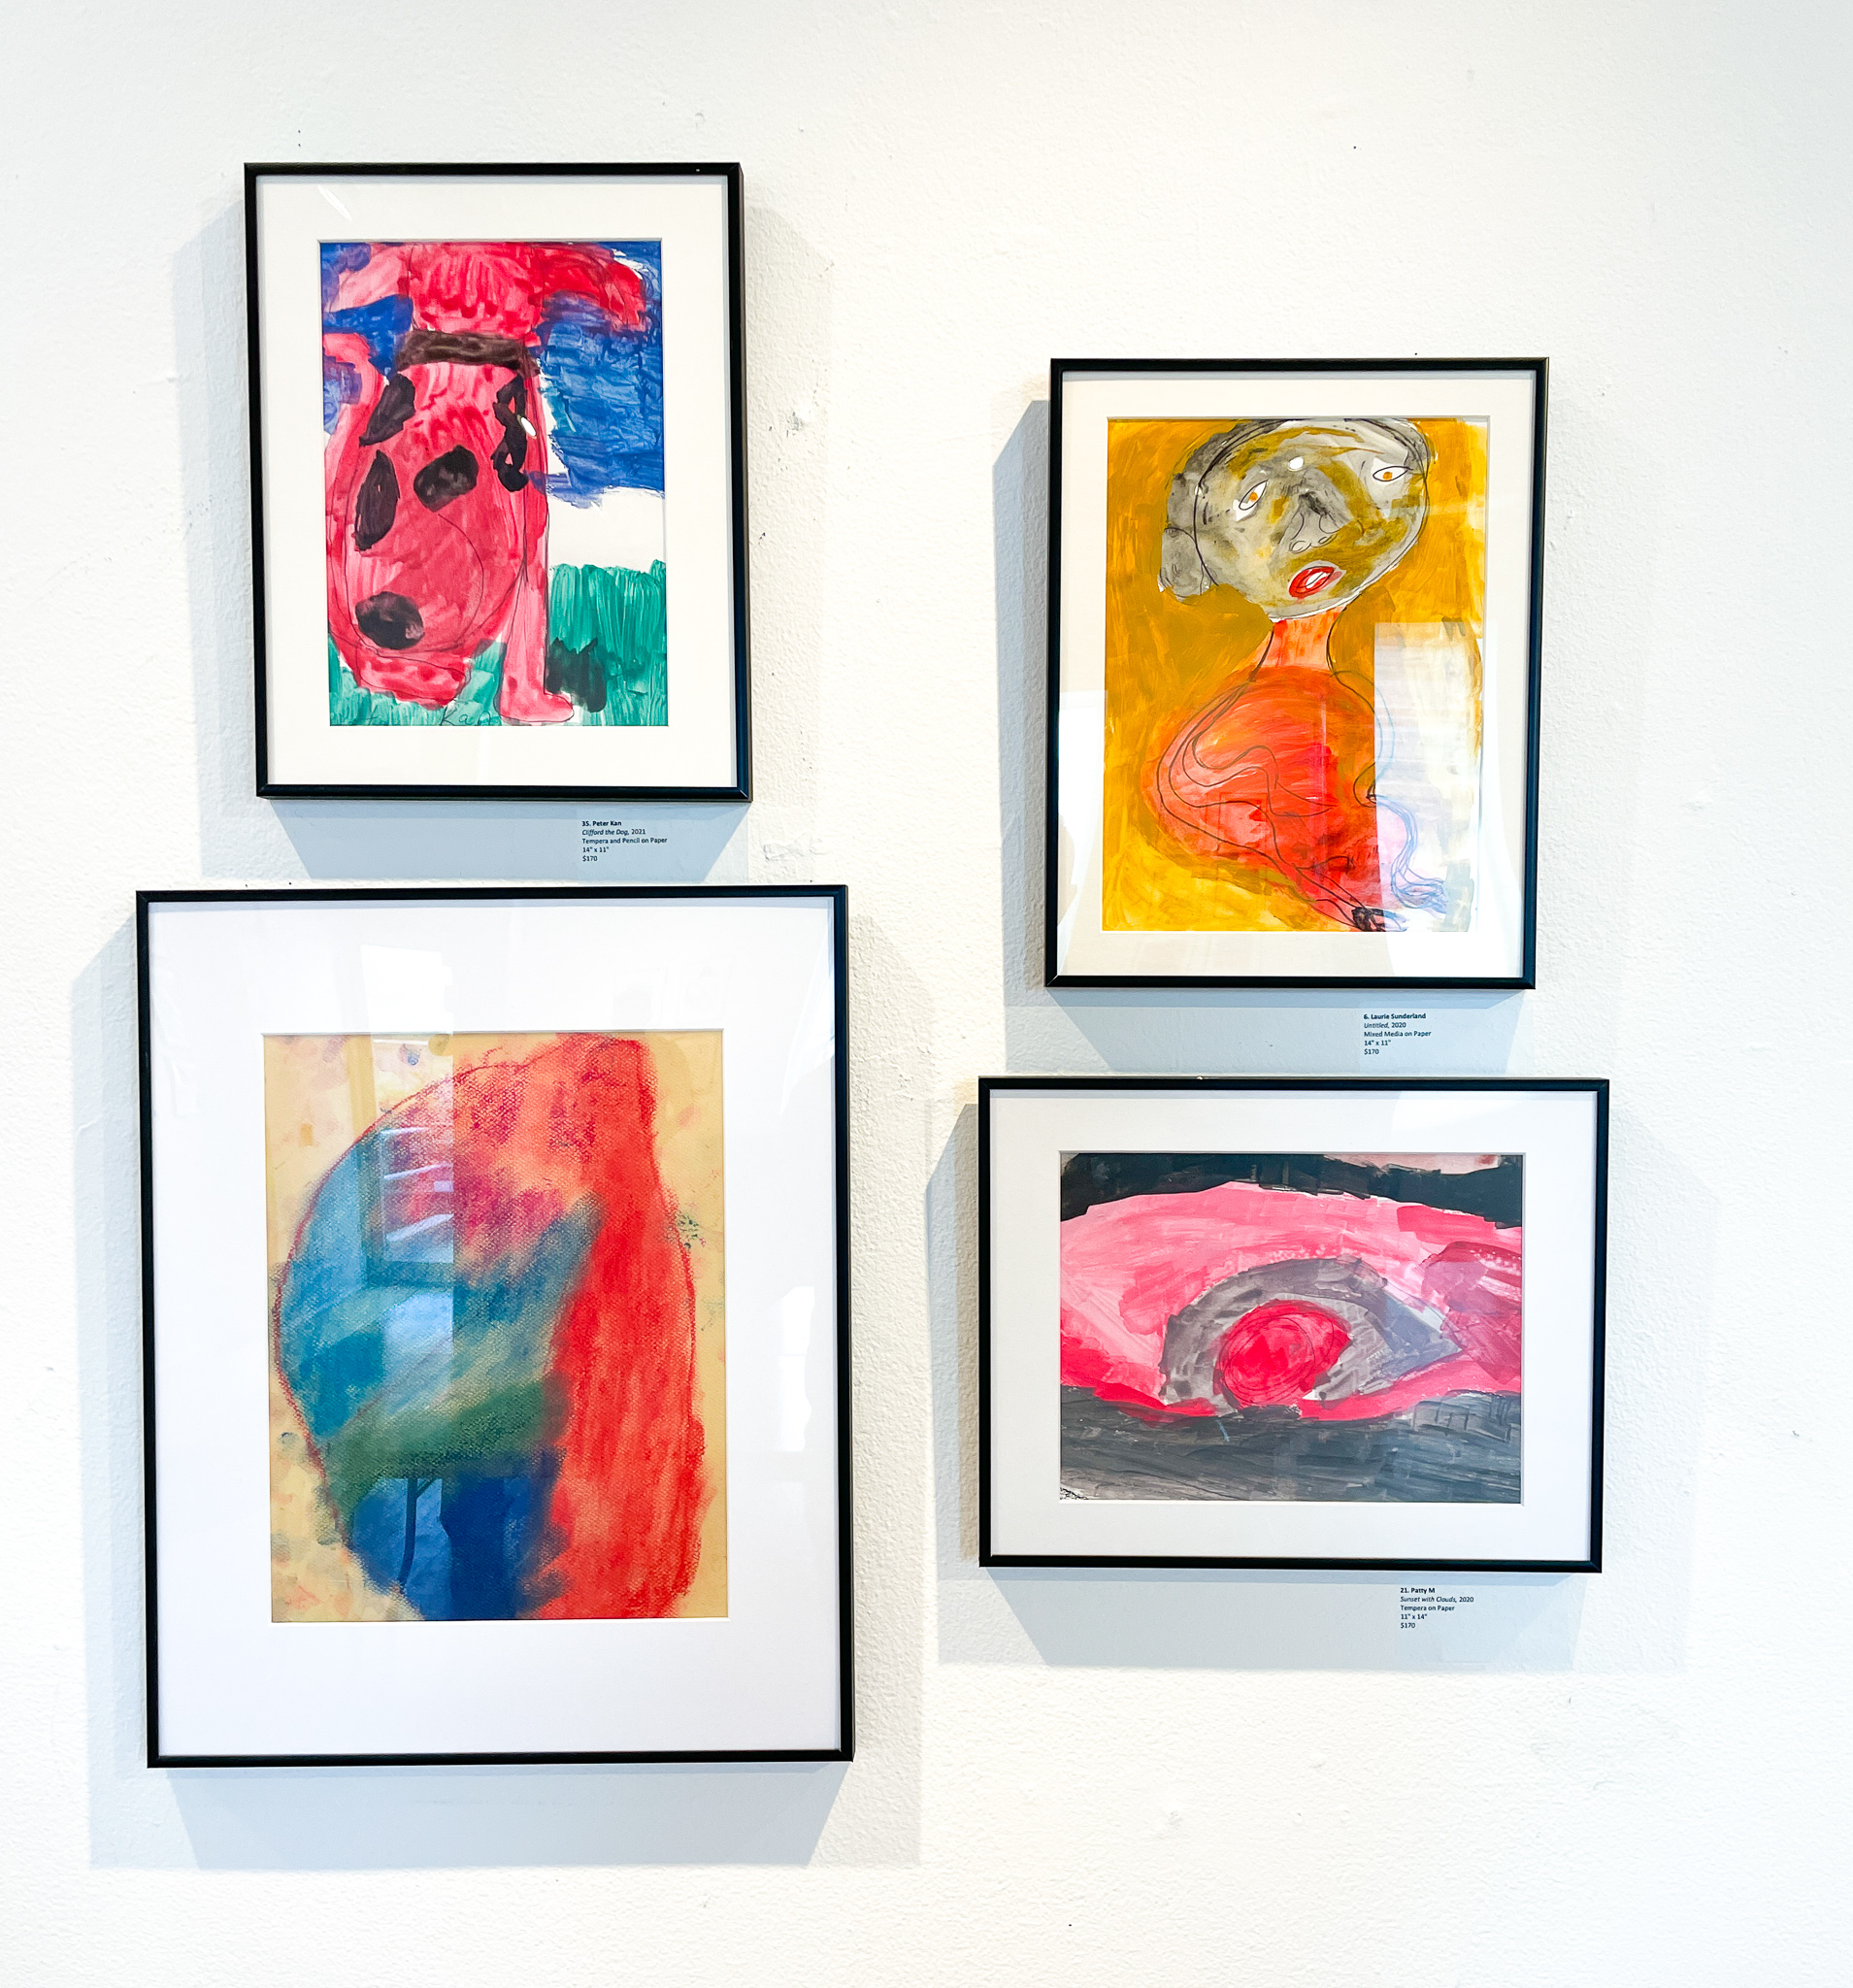 Gallery wall with four paintings, a red dog, a portrait of a woman, and two abstract paintings